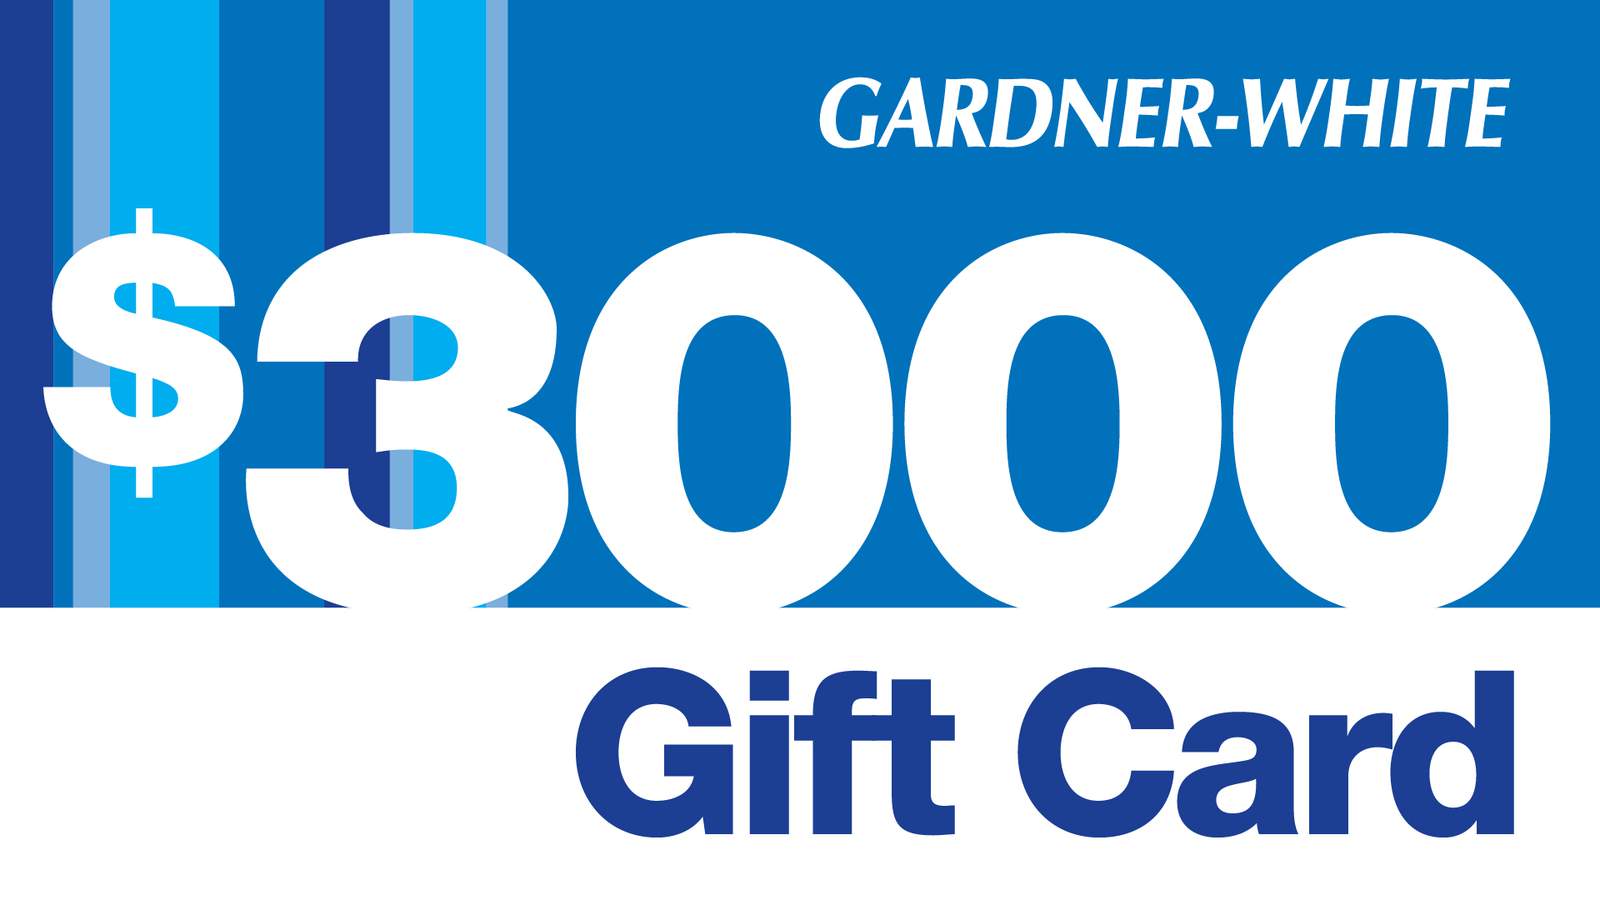 Gardner White Gift Card Giveaway Rules